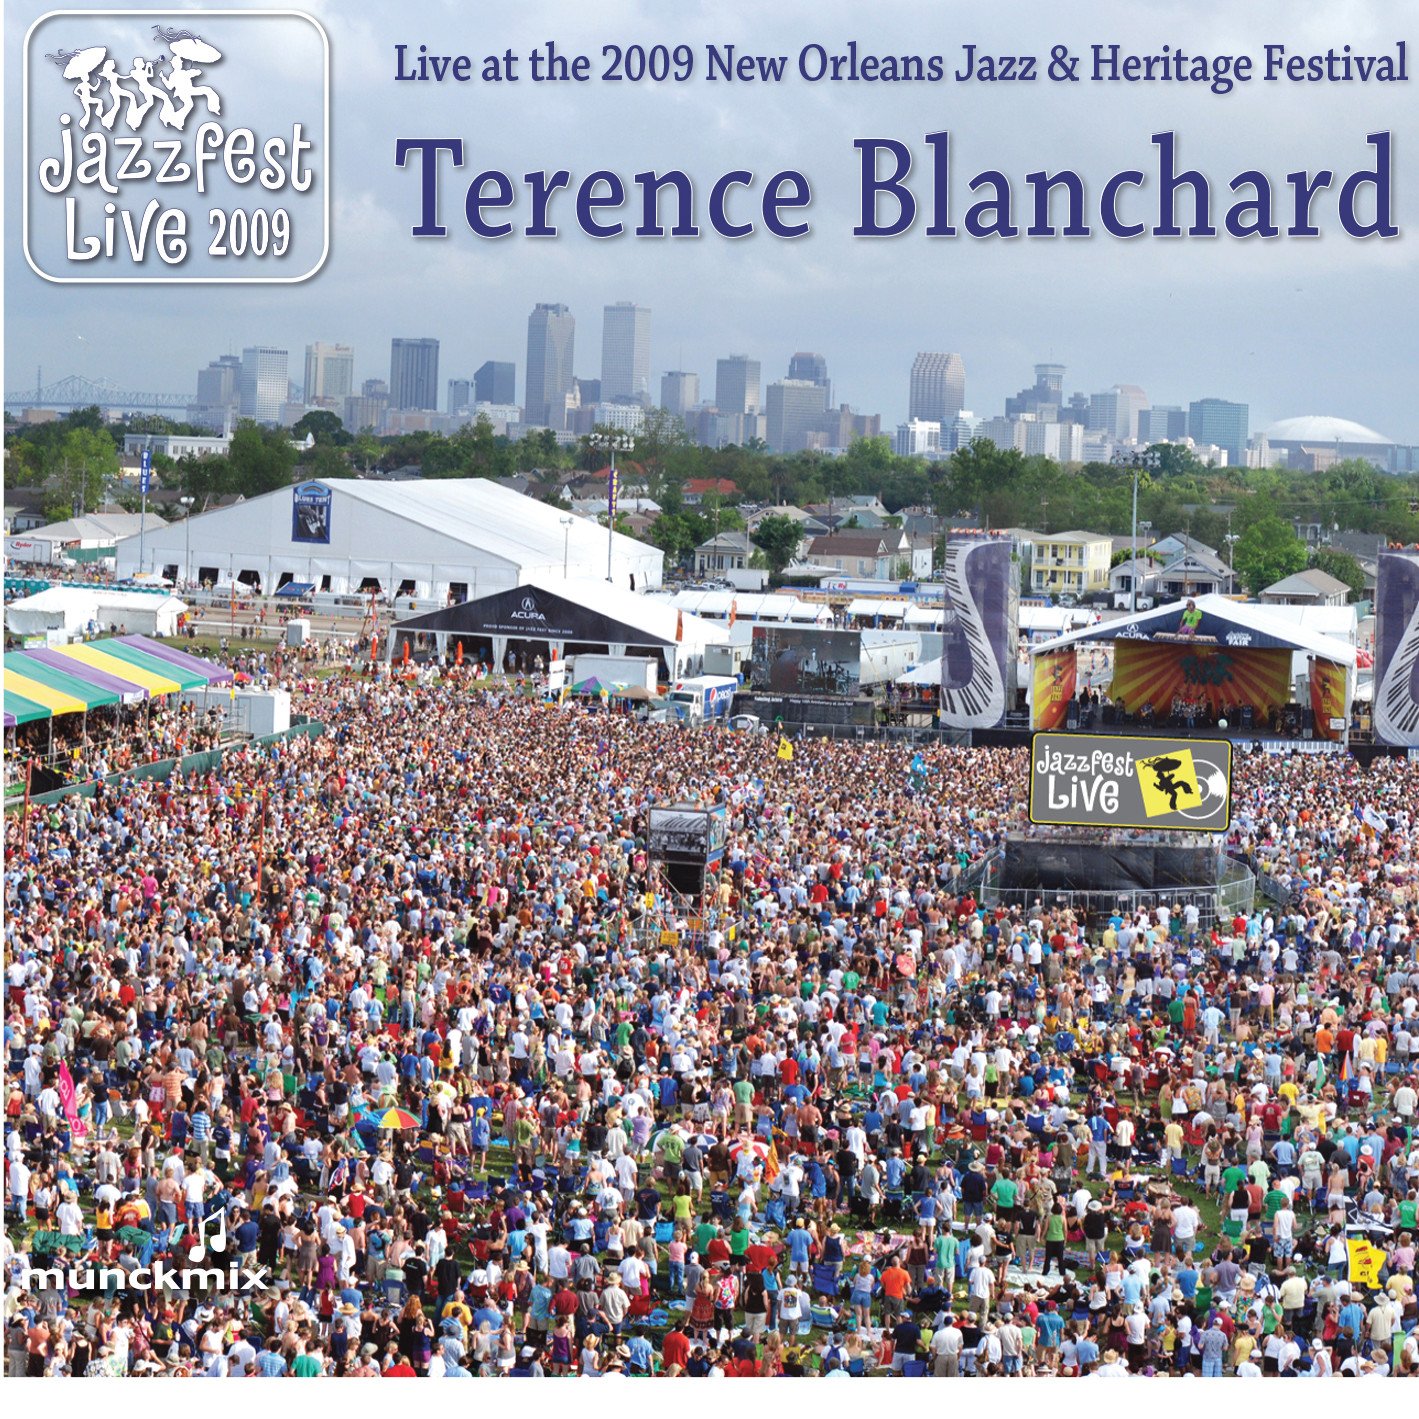 TERENCE BLANCHARD - Live at 2009 New Orleans Jazz & Heritage Festival cover 